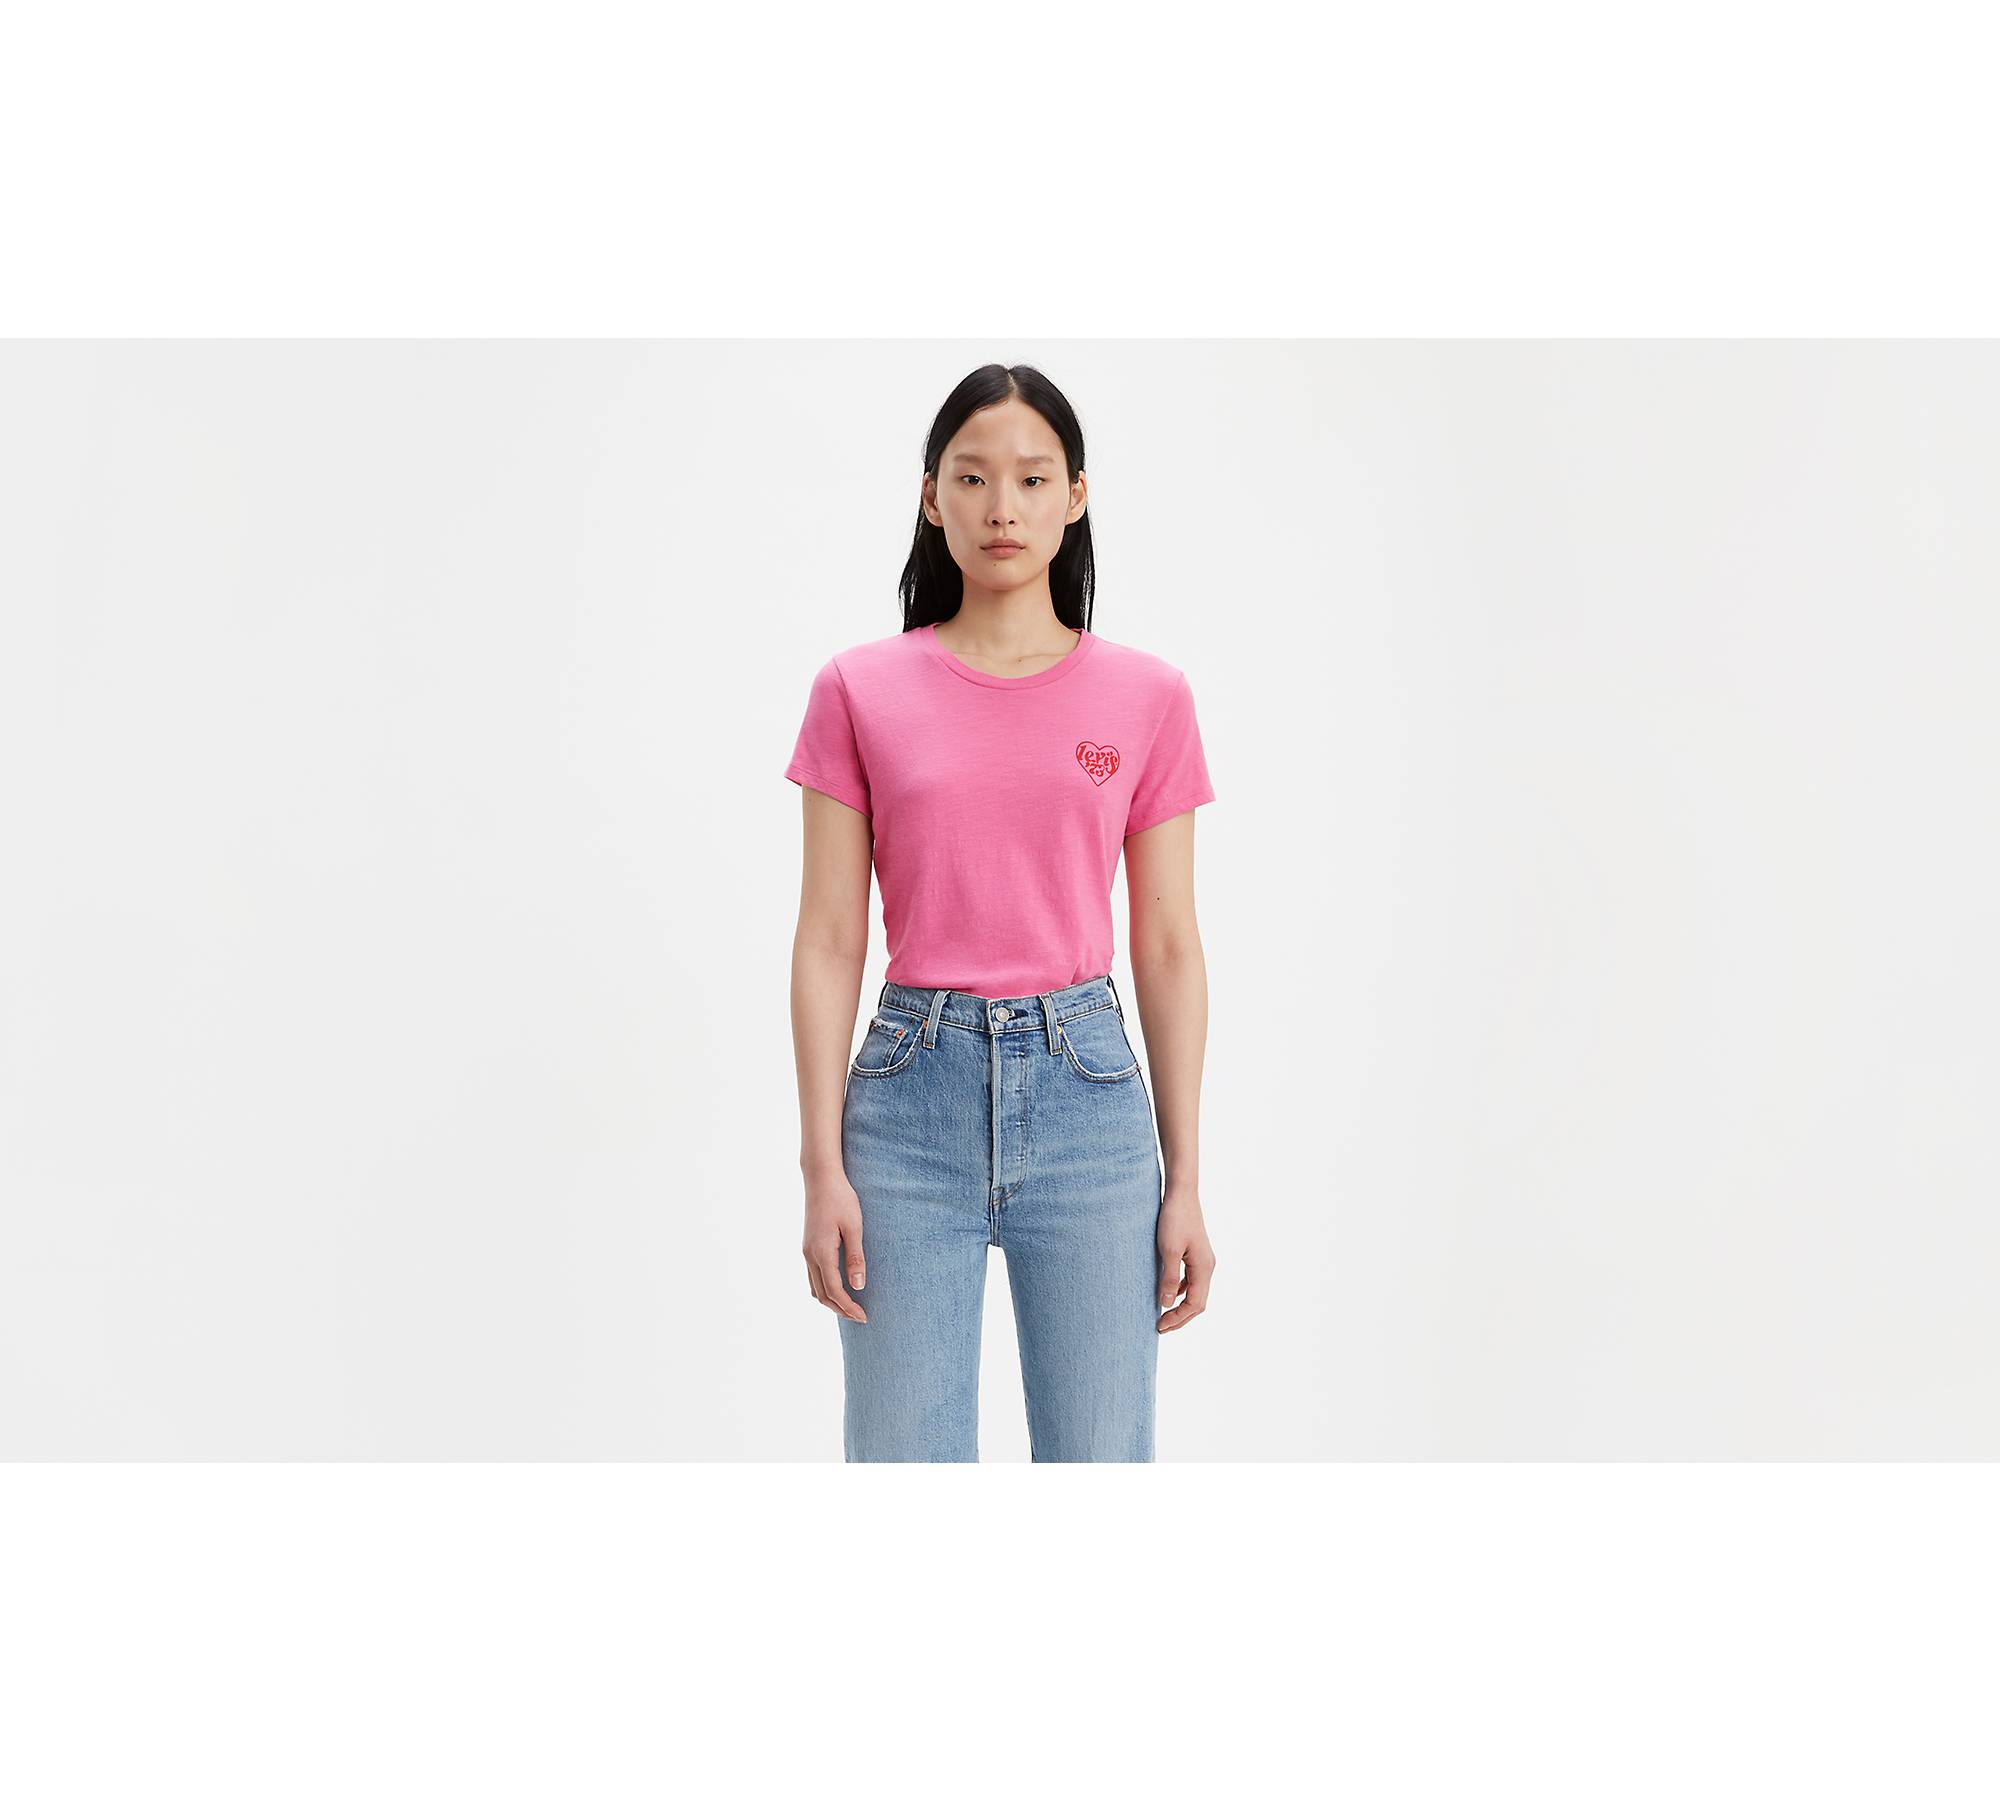 Levis T-shirt - Pink - OUT OF STOCK